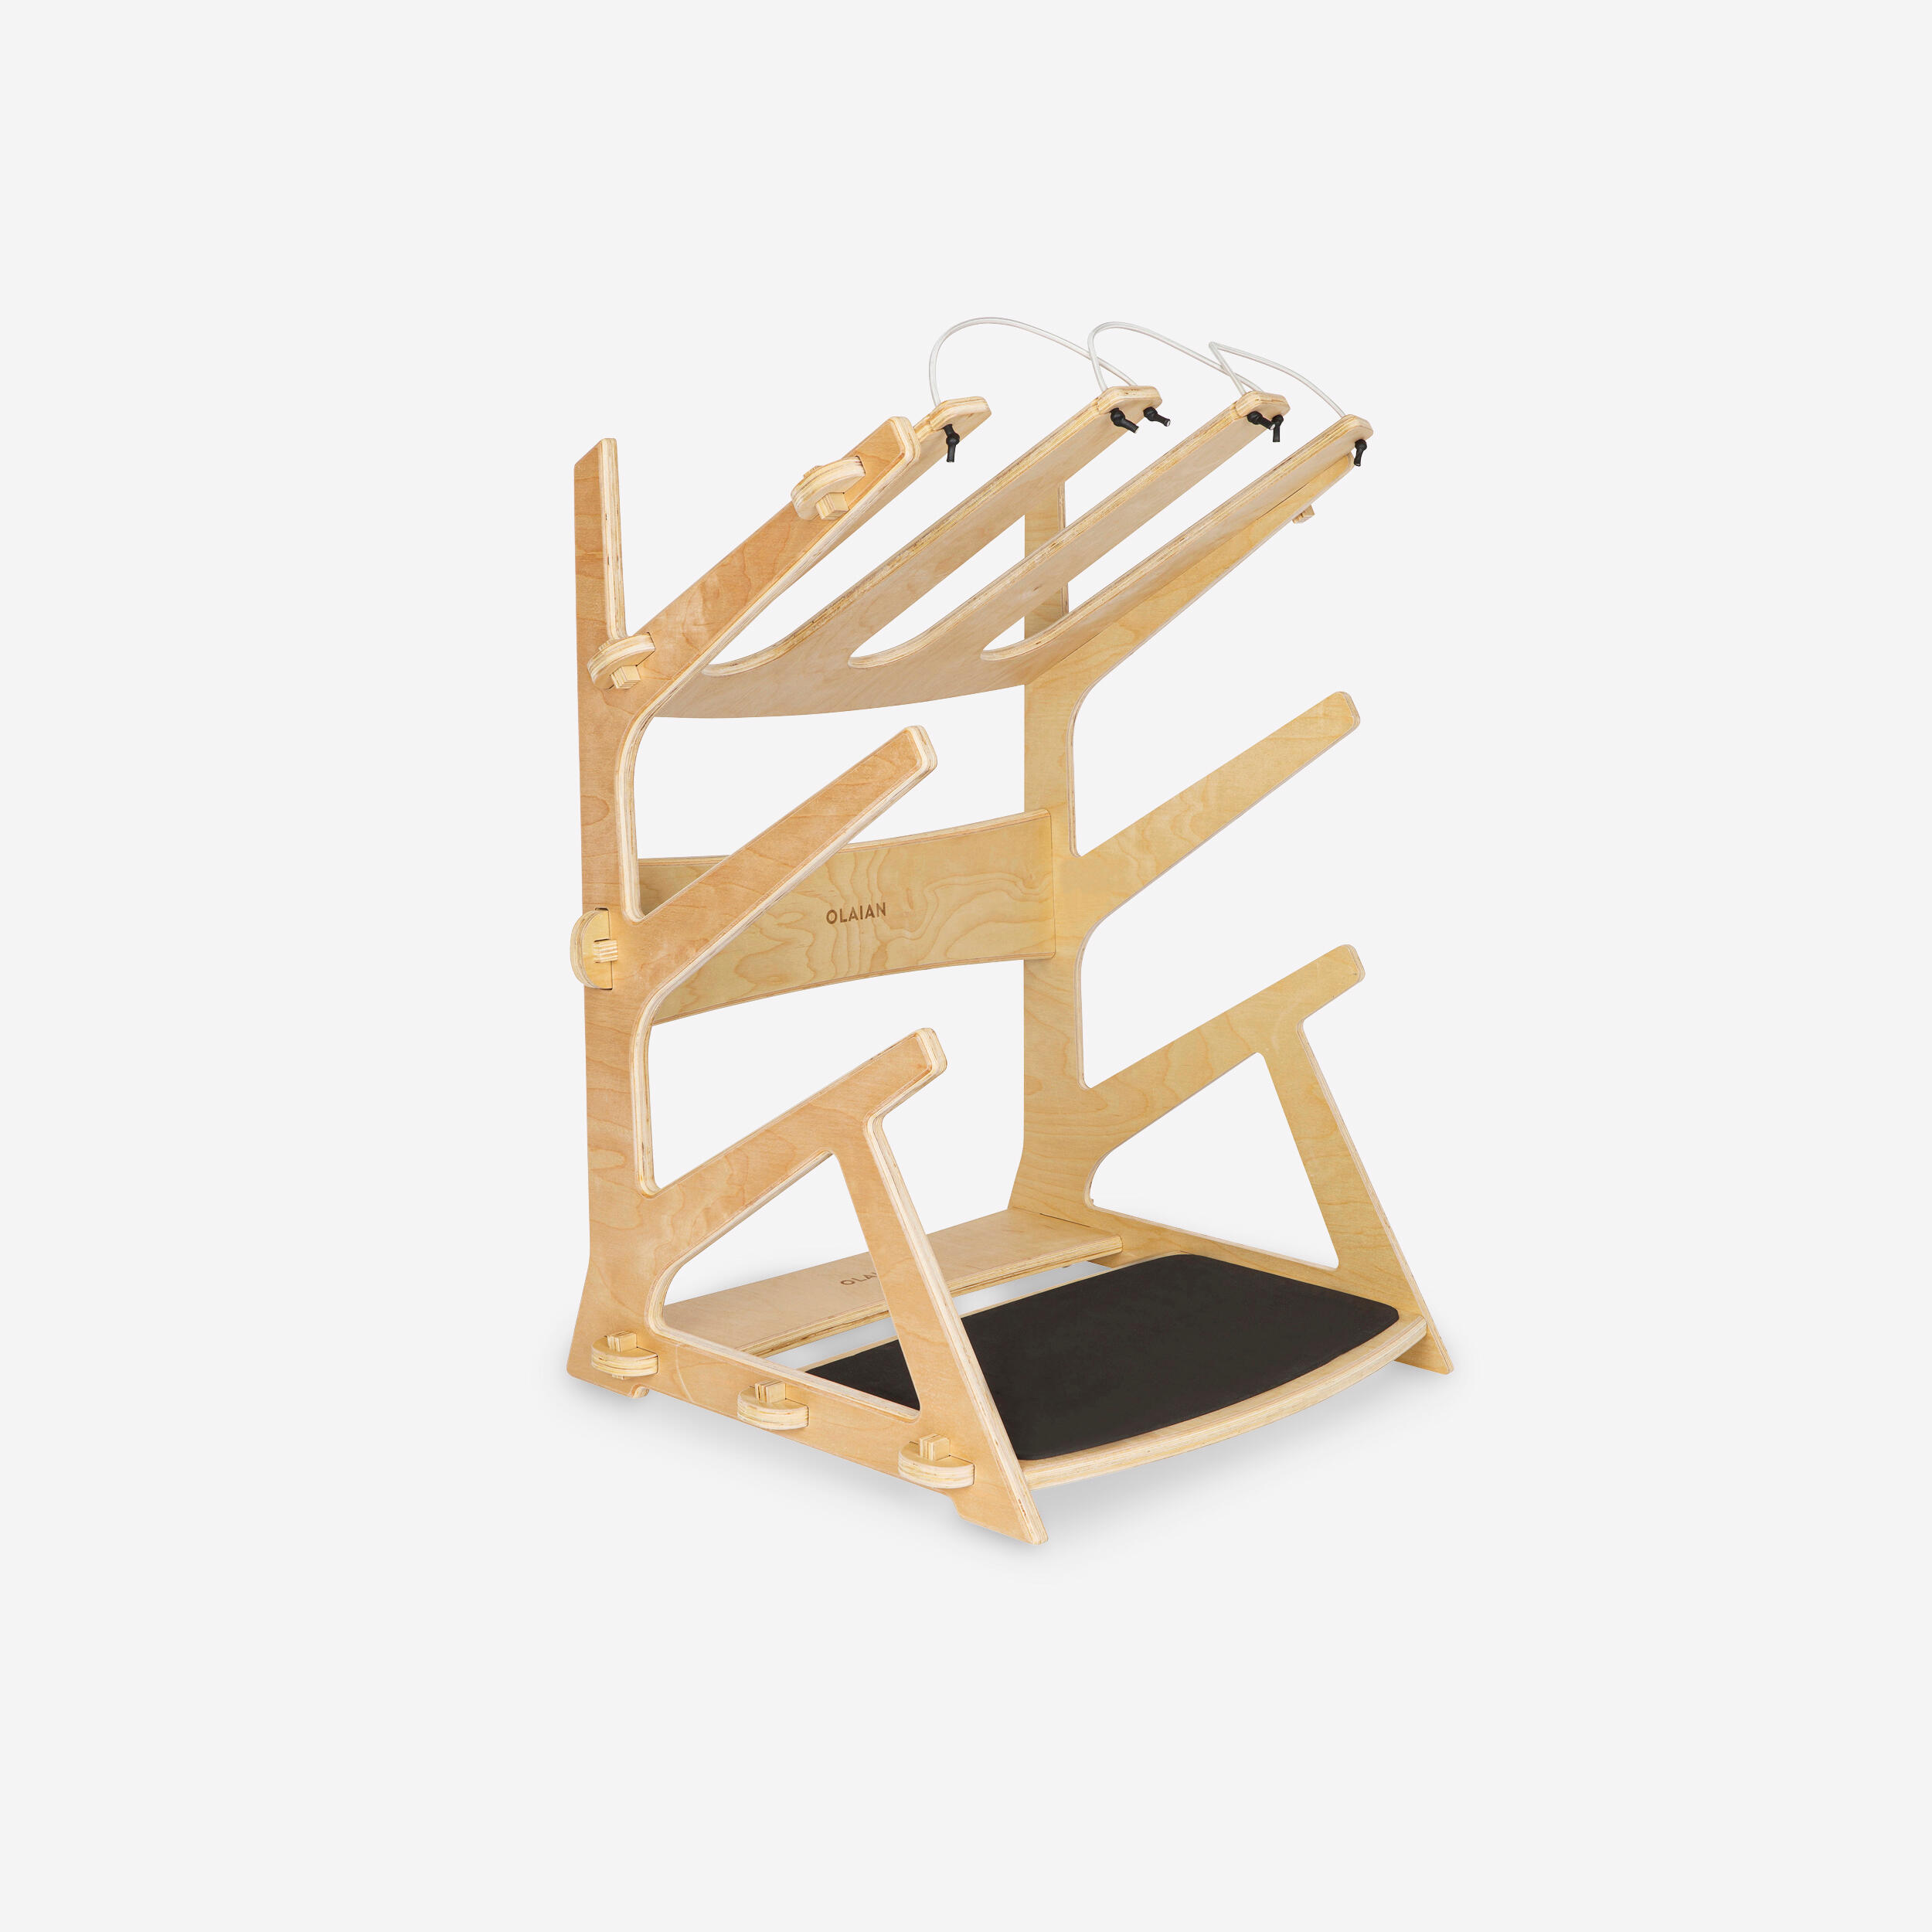 OLAIAN Free-standing SURFBOARD RACK for 3 boards store vertically or horizontally